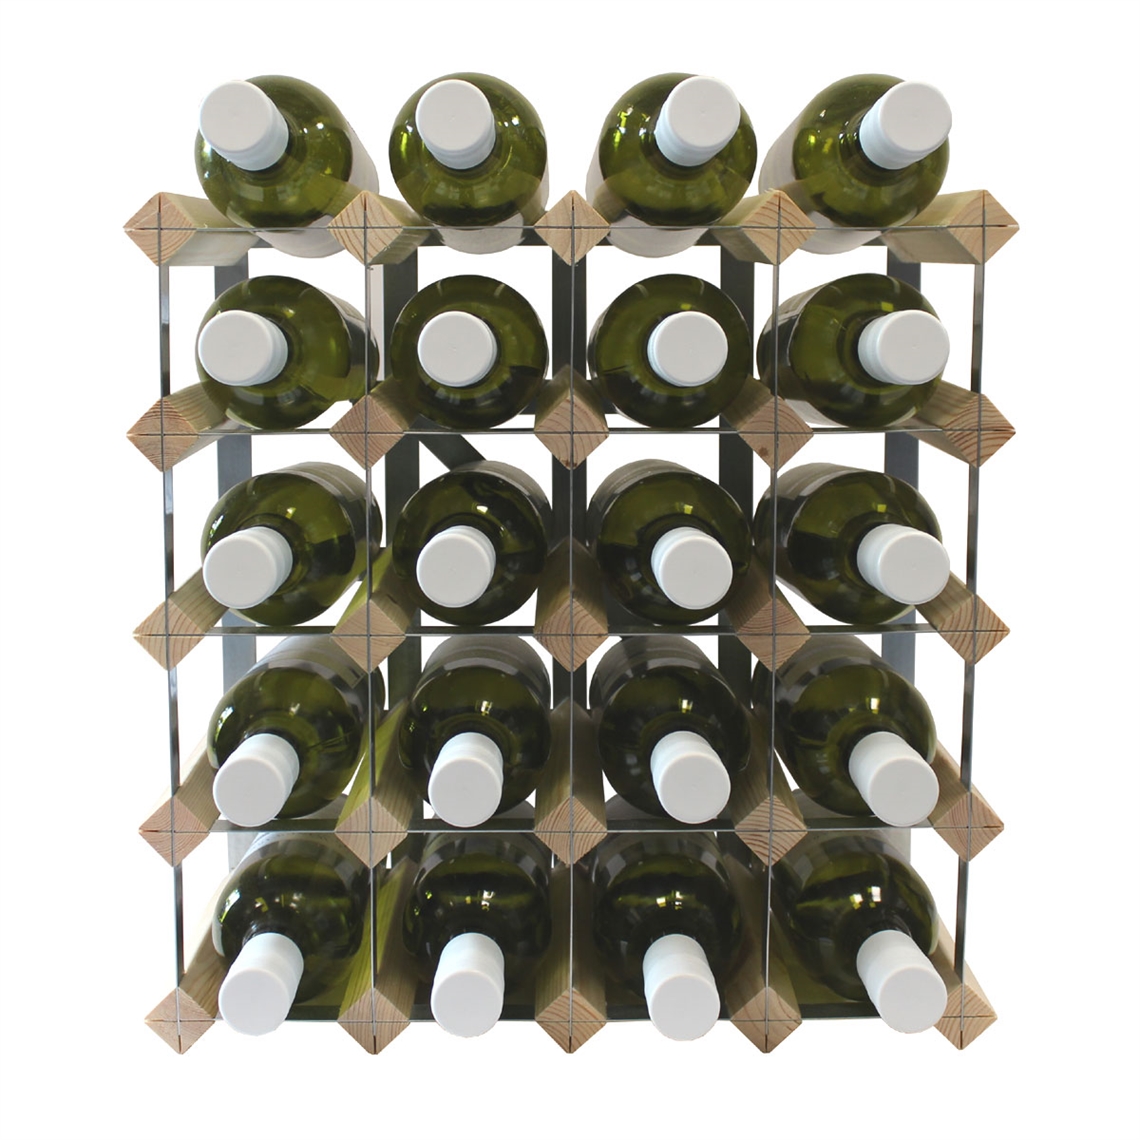 View more counter top wine racks from our Assembled Wine Racks range